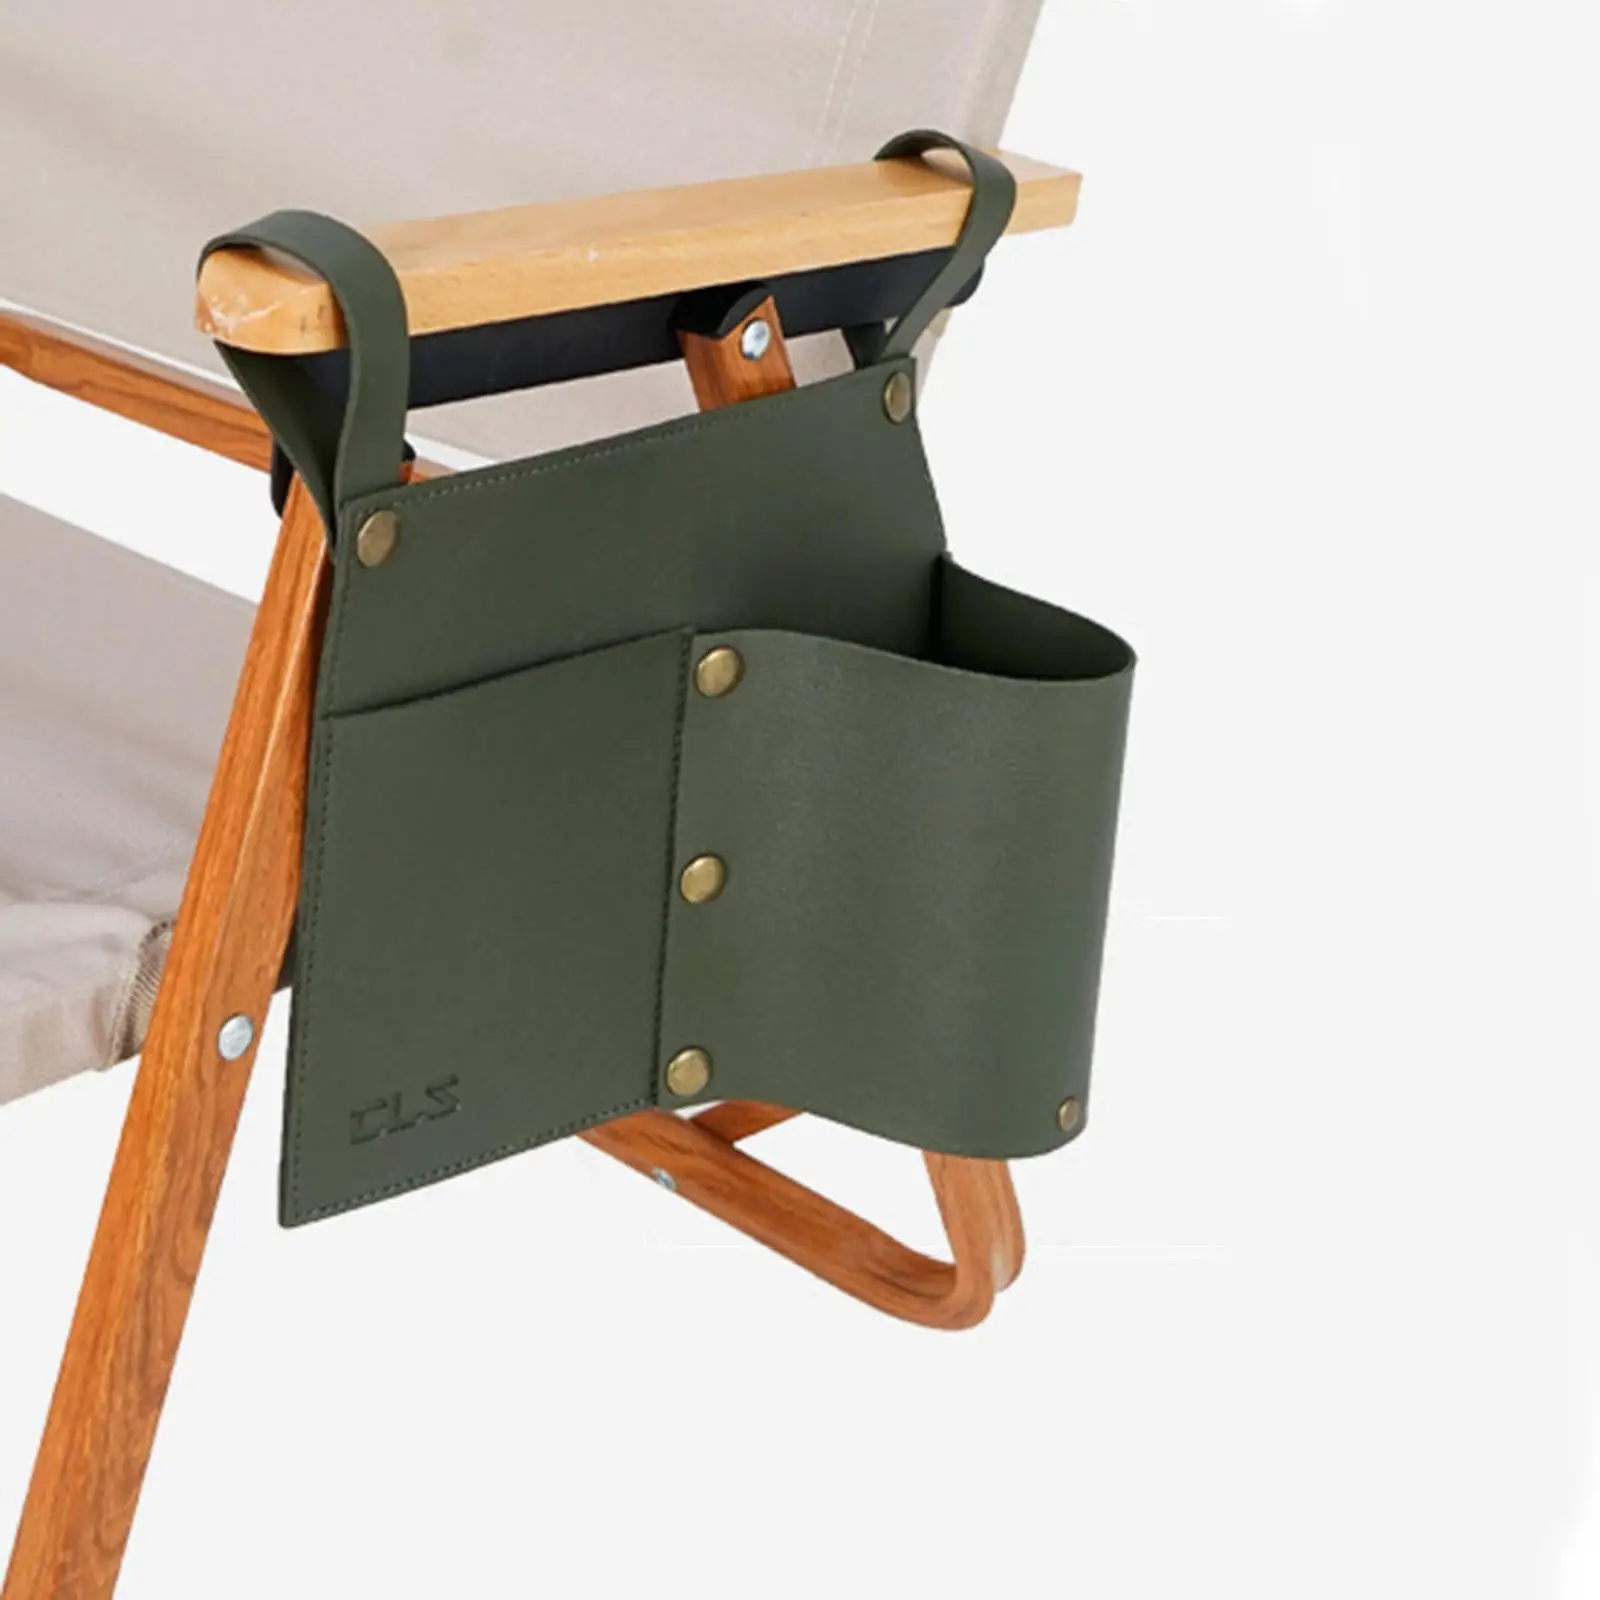 Camping Armrest Organizer Tote Hanging Bags Sundries Holder Shoulder Pouch Arm Seat Seat for Dorm Sofa